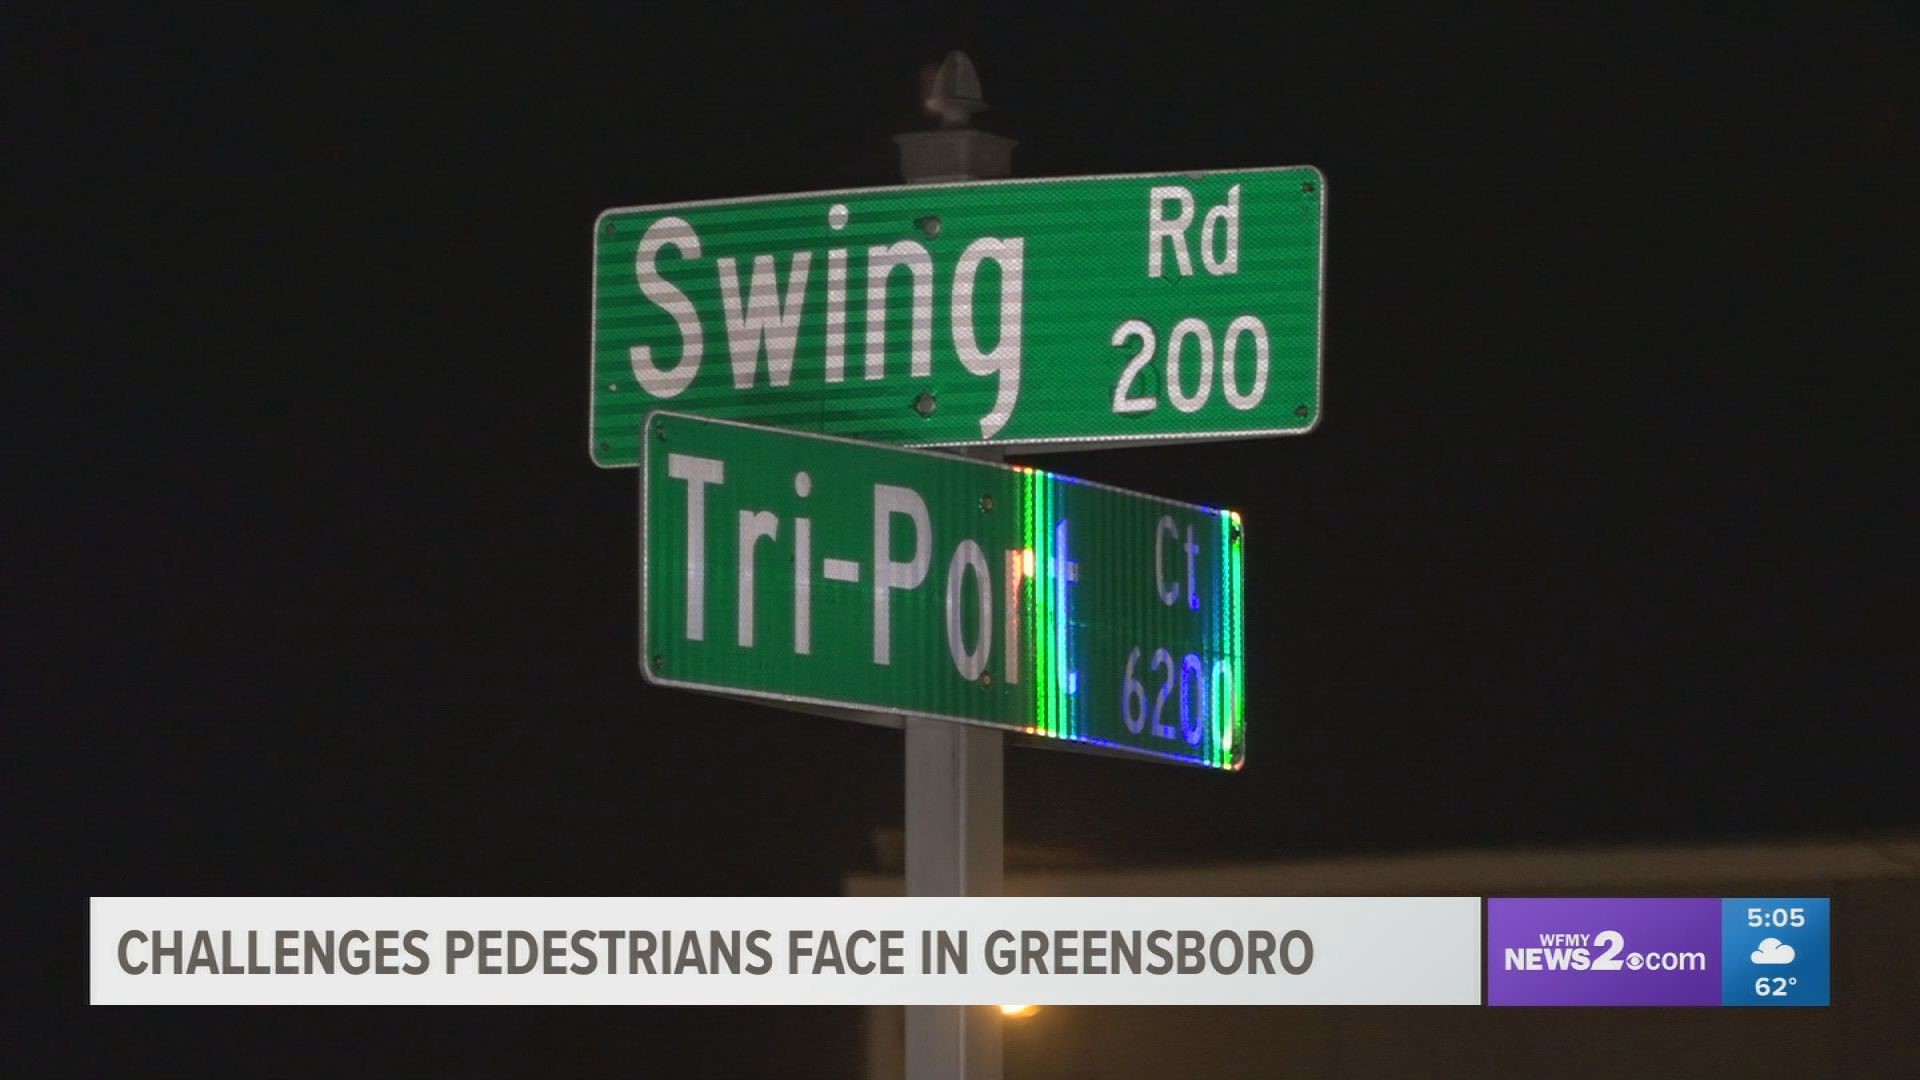 Right now, Greensboro's Department of Transportation is planning improvements at that intersection and others on campus because of the heavy pedestrian traffic.